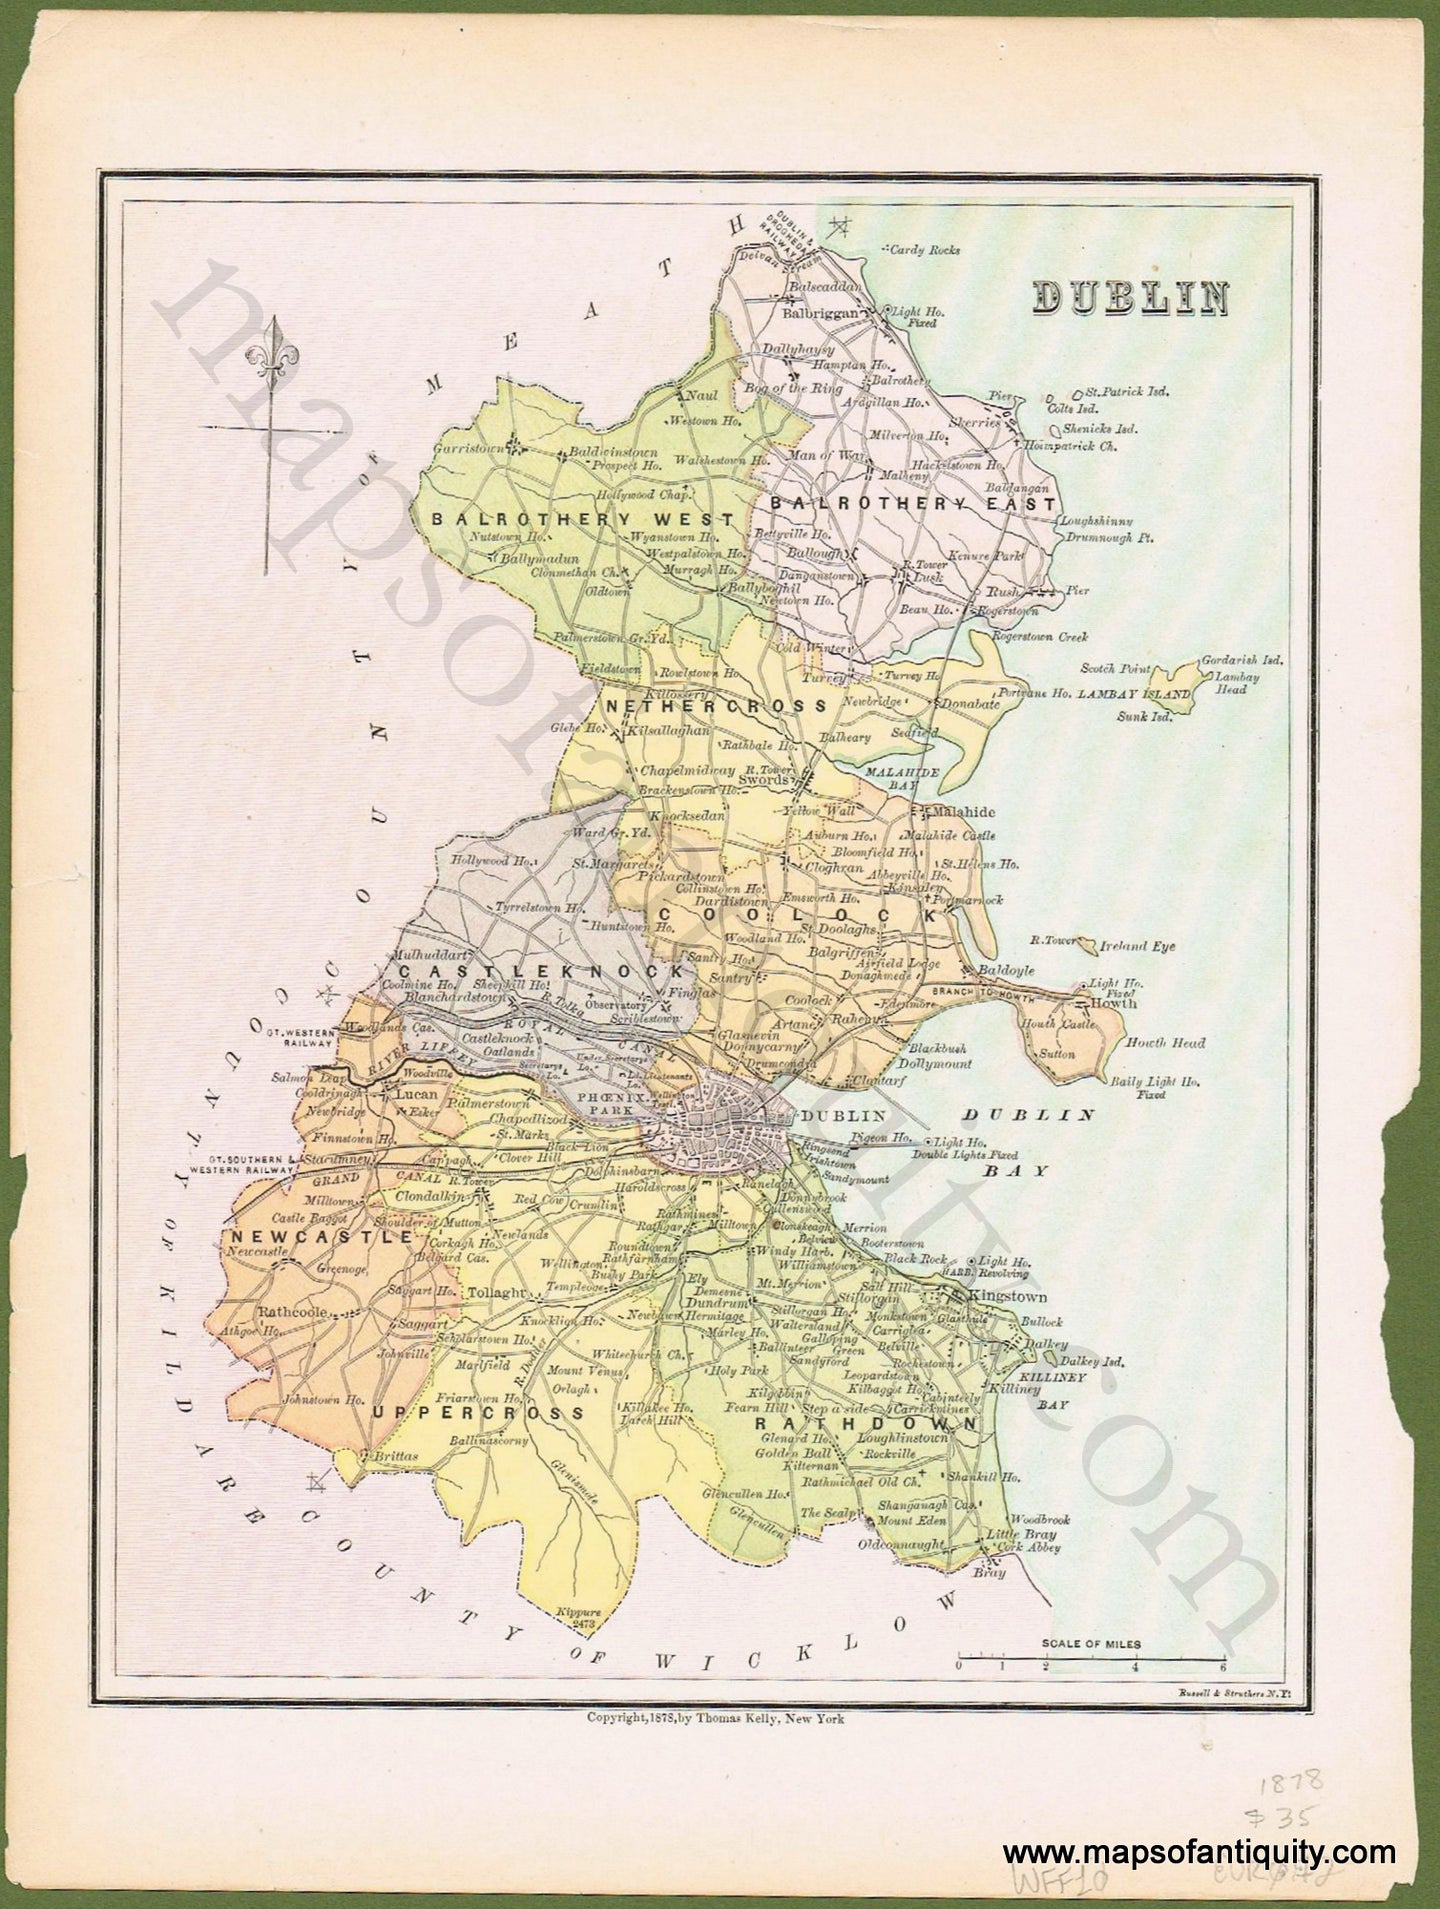 Antique-Printed-Color-Map-Dublin-verso:-Longford-**********-Europe-United-Kingdom-1878-Kelly-Maps-Of-Antiquity